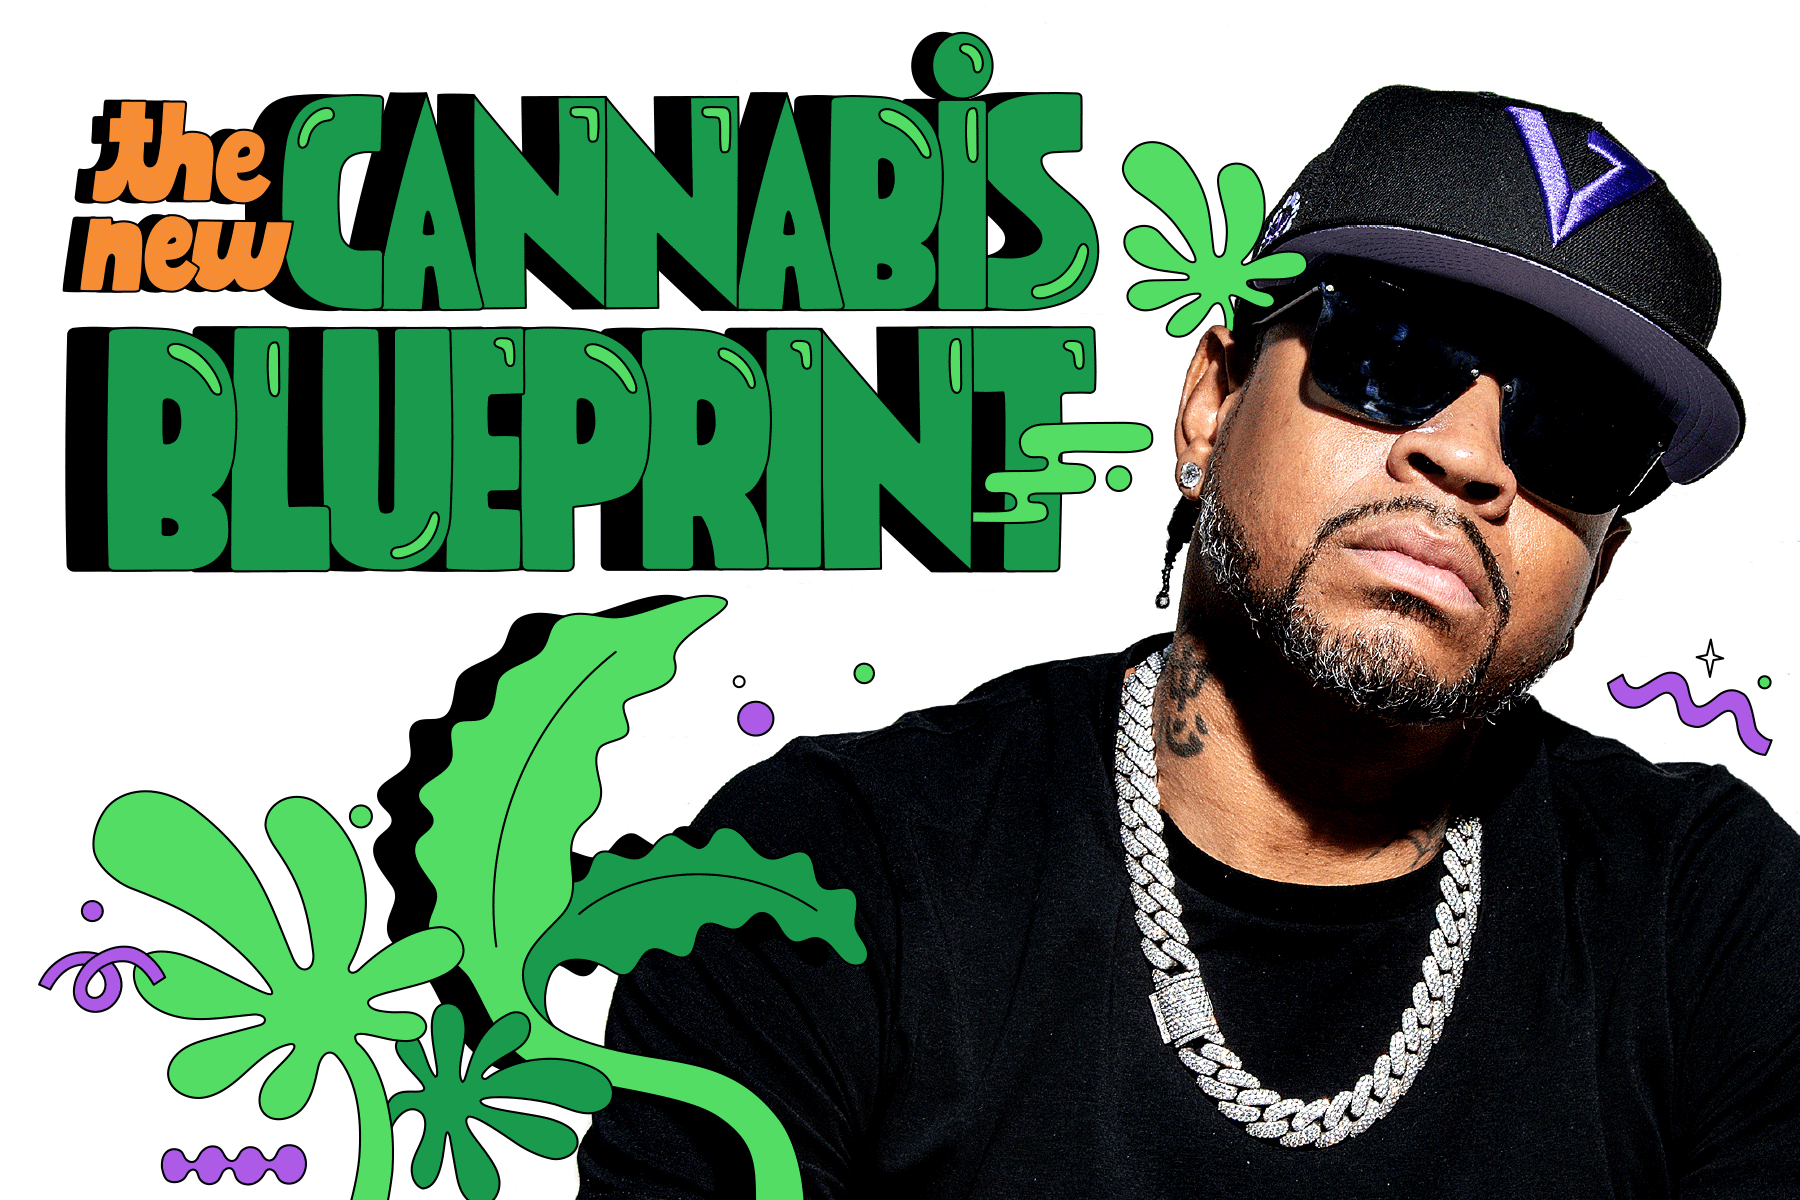 Allen Iverson with "the new cannabis blueprint" in type next to him